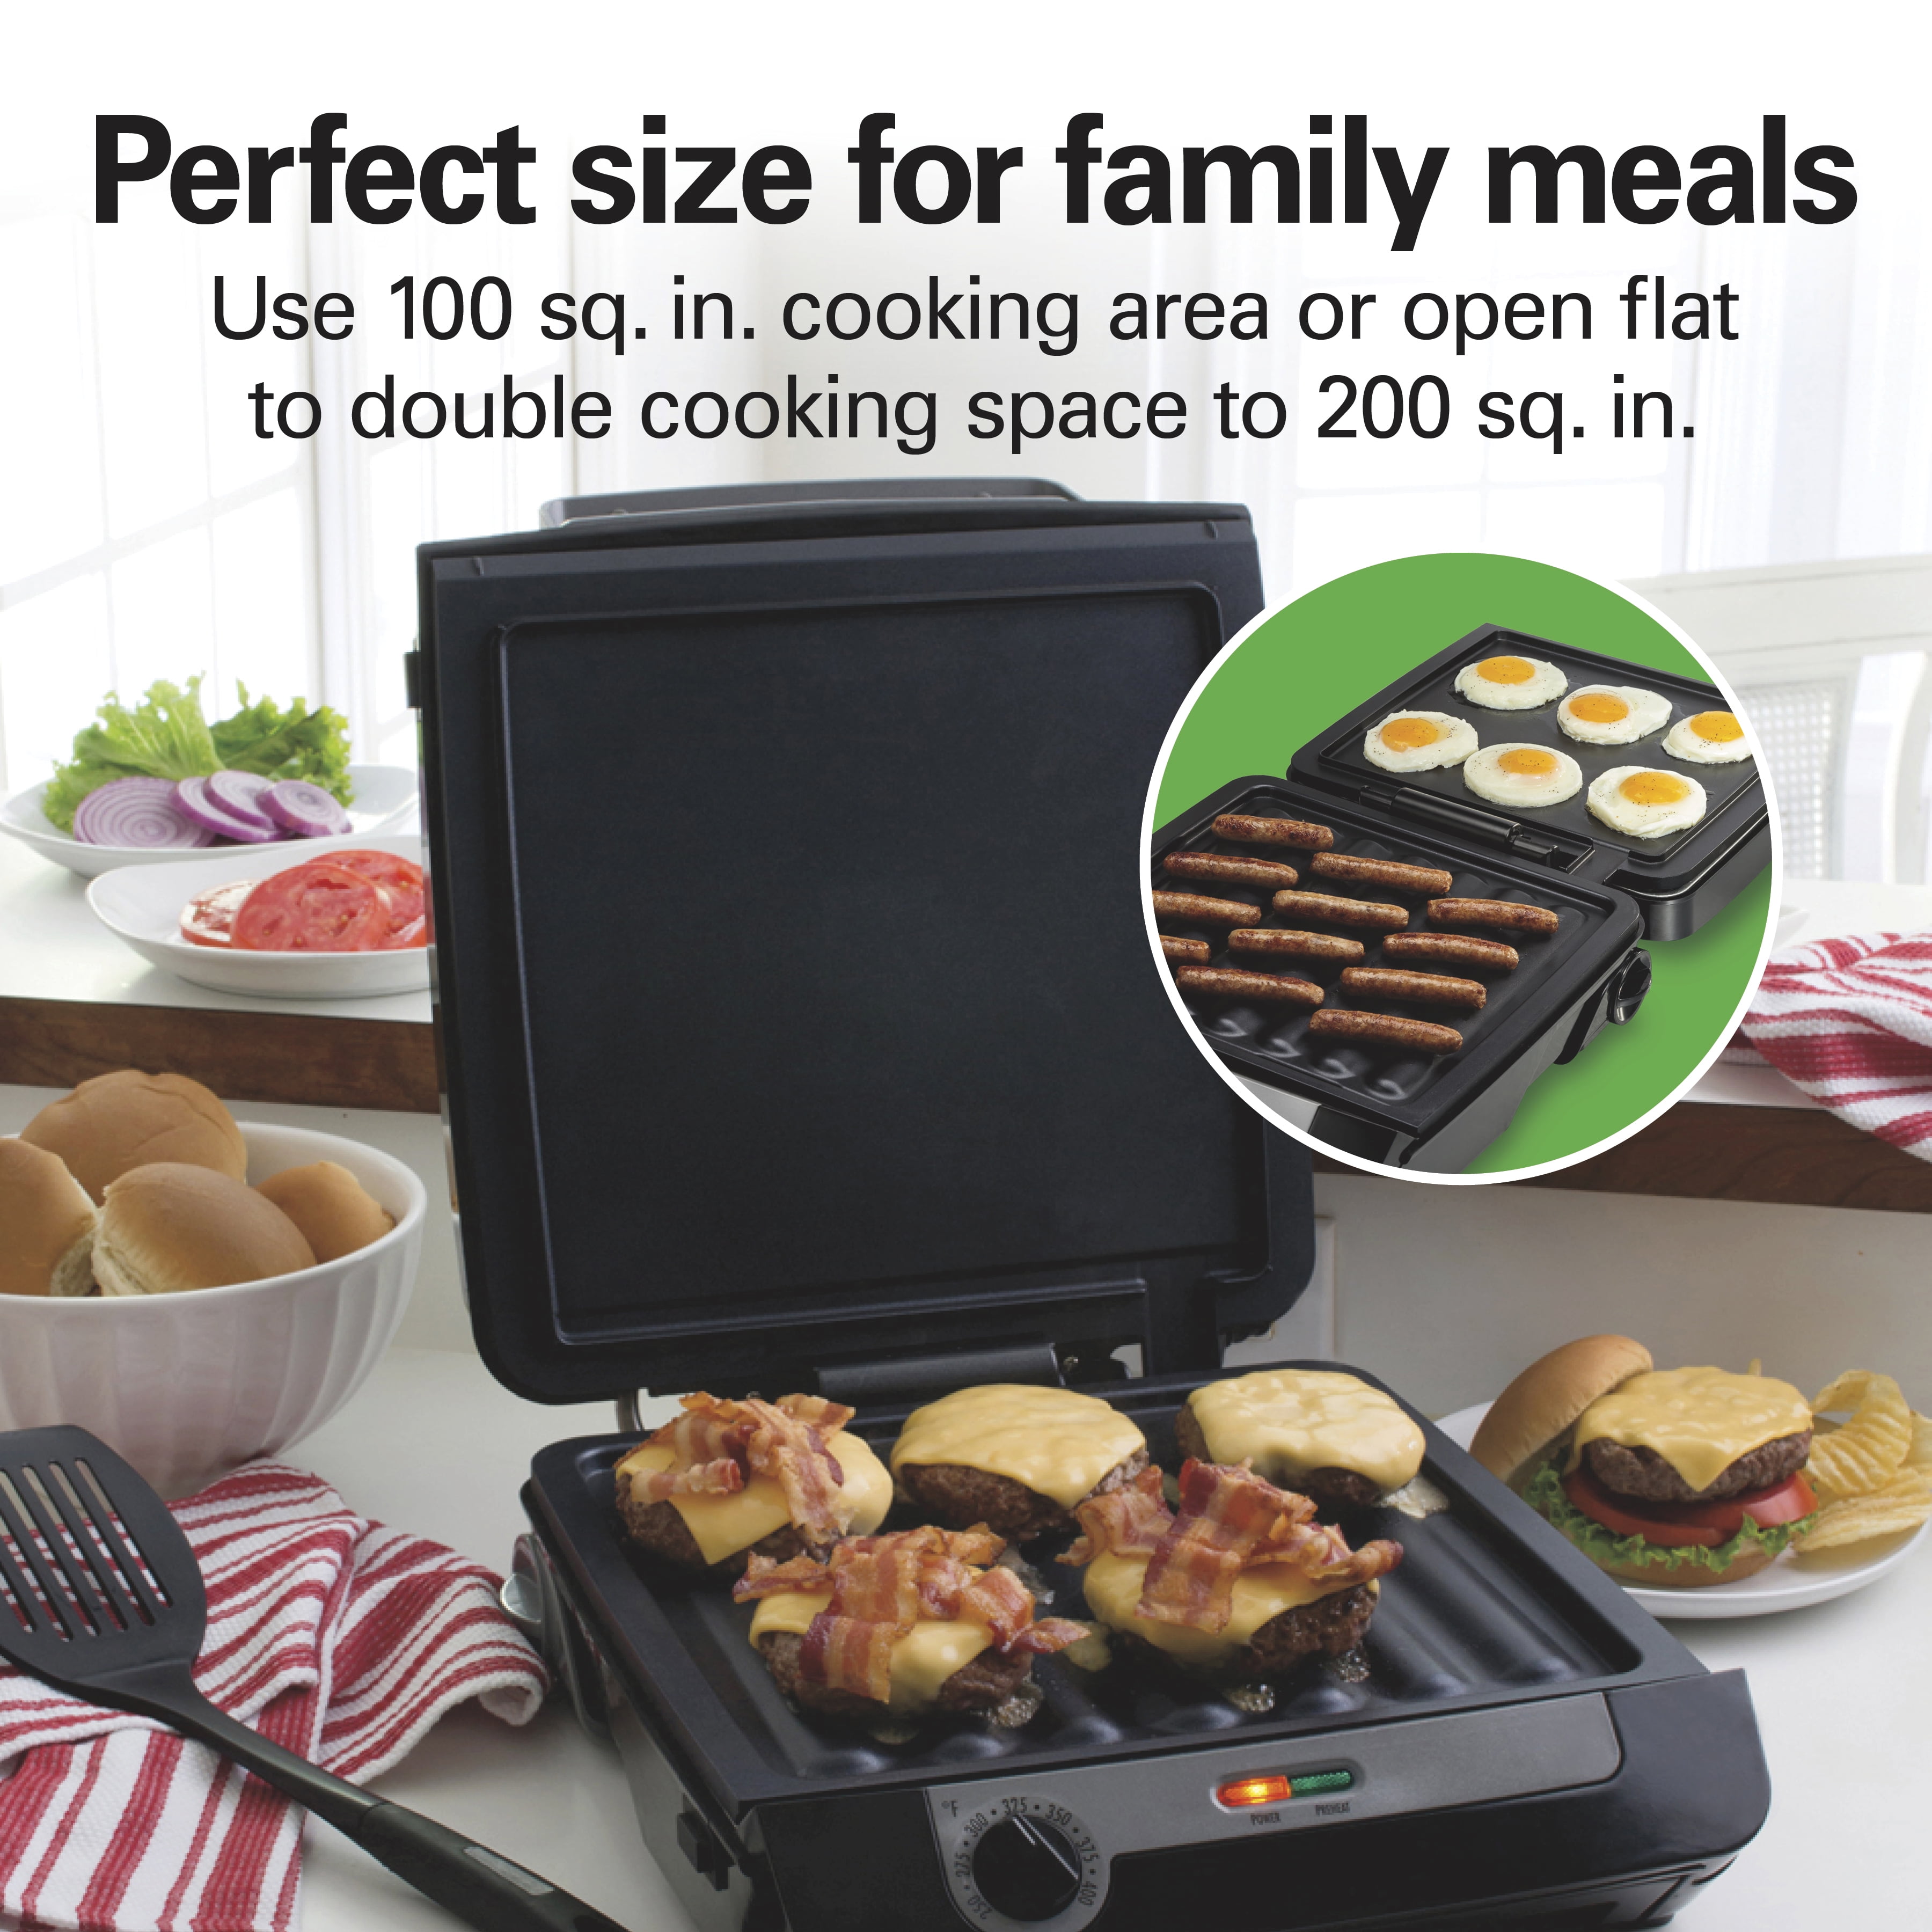 Hamilton Beach 4-in-1 Indoor Grill & Electric Griddle Combo with Bacon  Cooker, Opens Flat to Double Cooking Surface, Removable Nonstick Plates,  Black